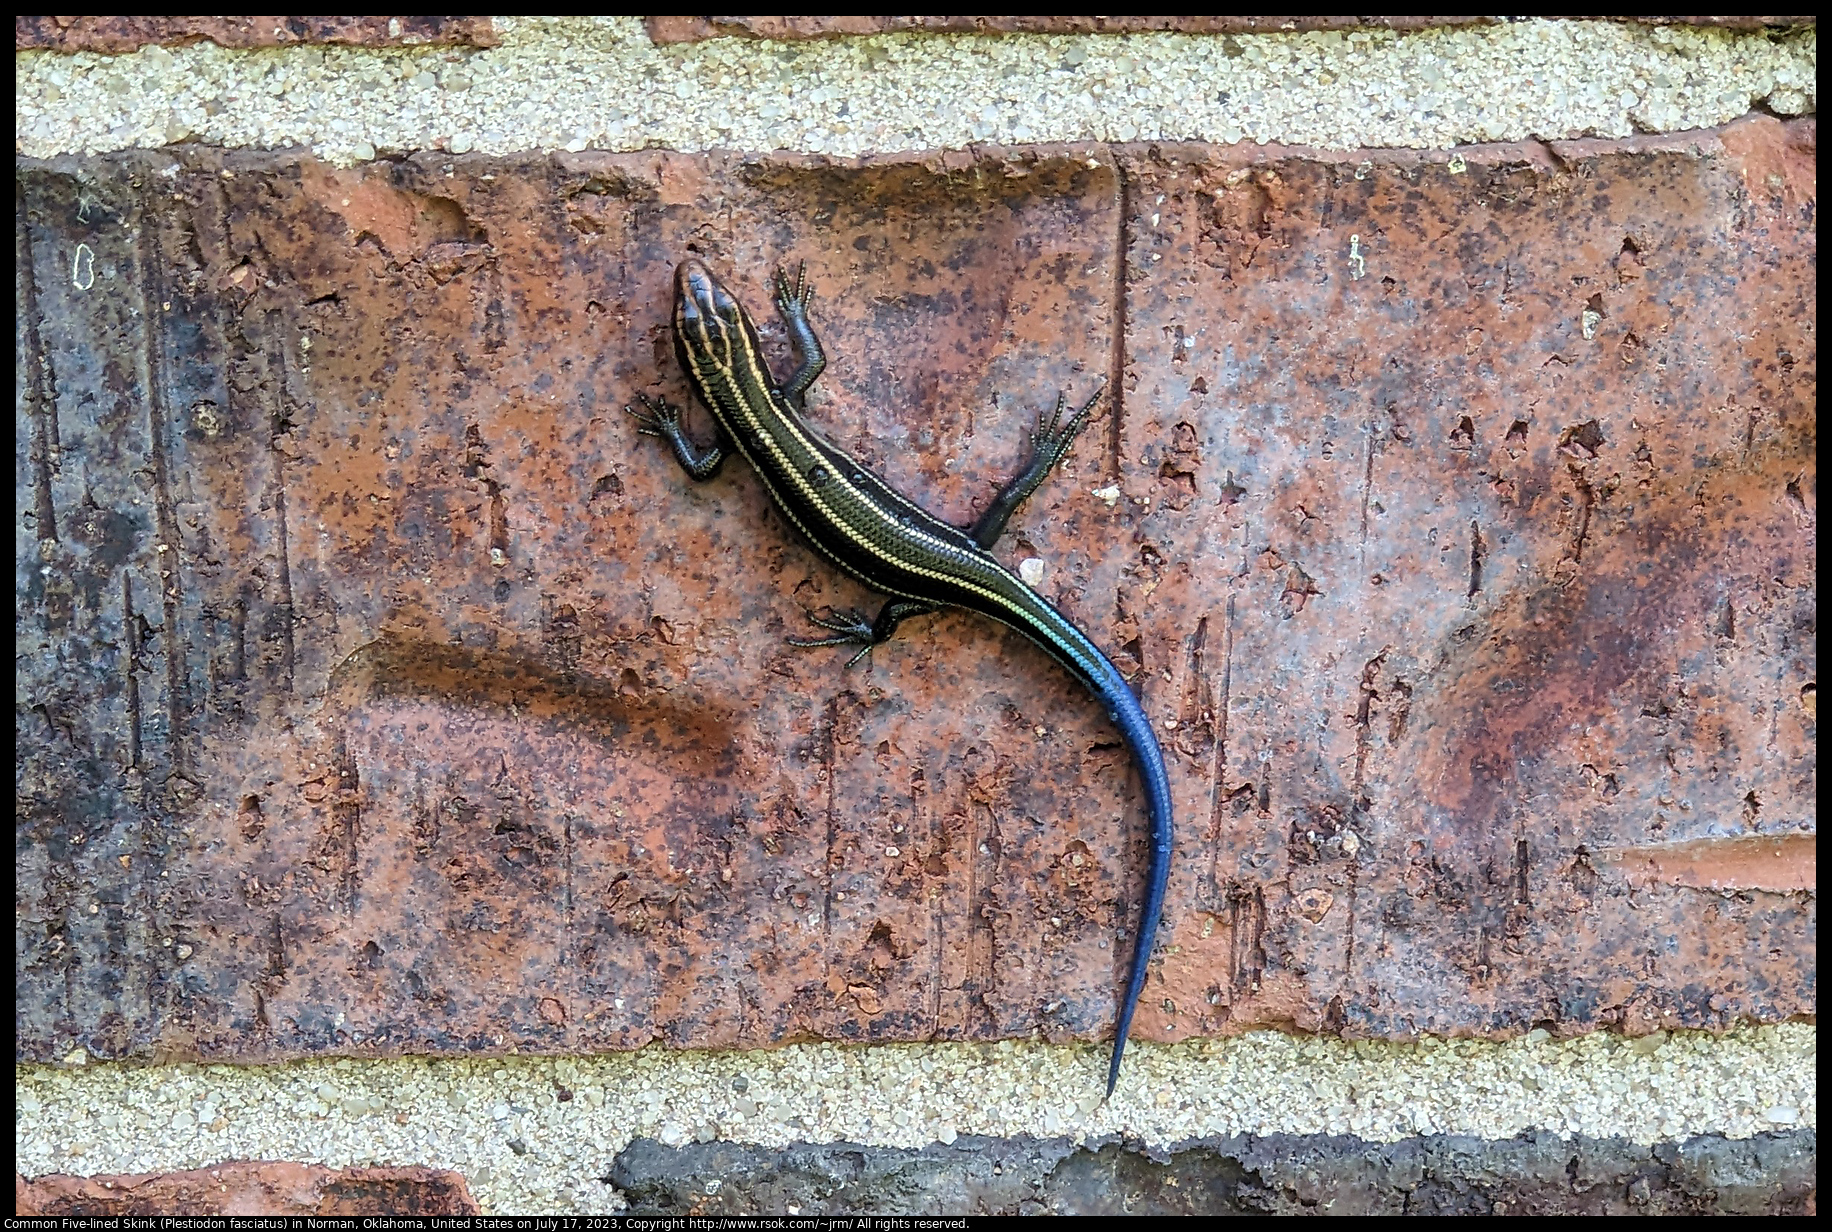 Common Five-lined Skink (Plestiodon fasciatus) in Norman, Oklahoma, United States on July 17, 2023